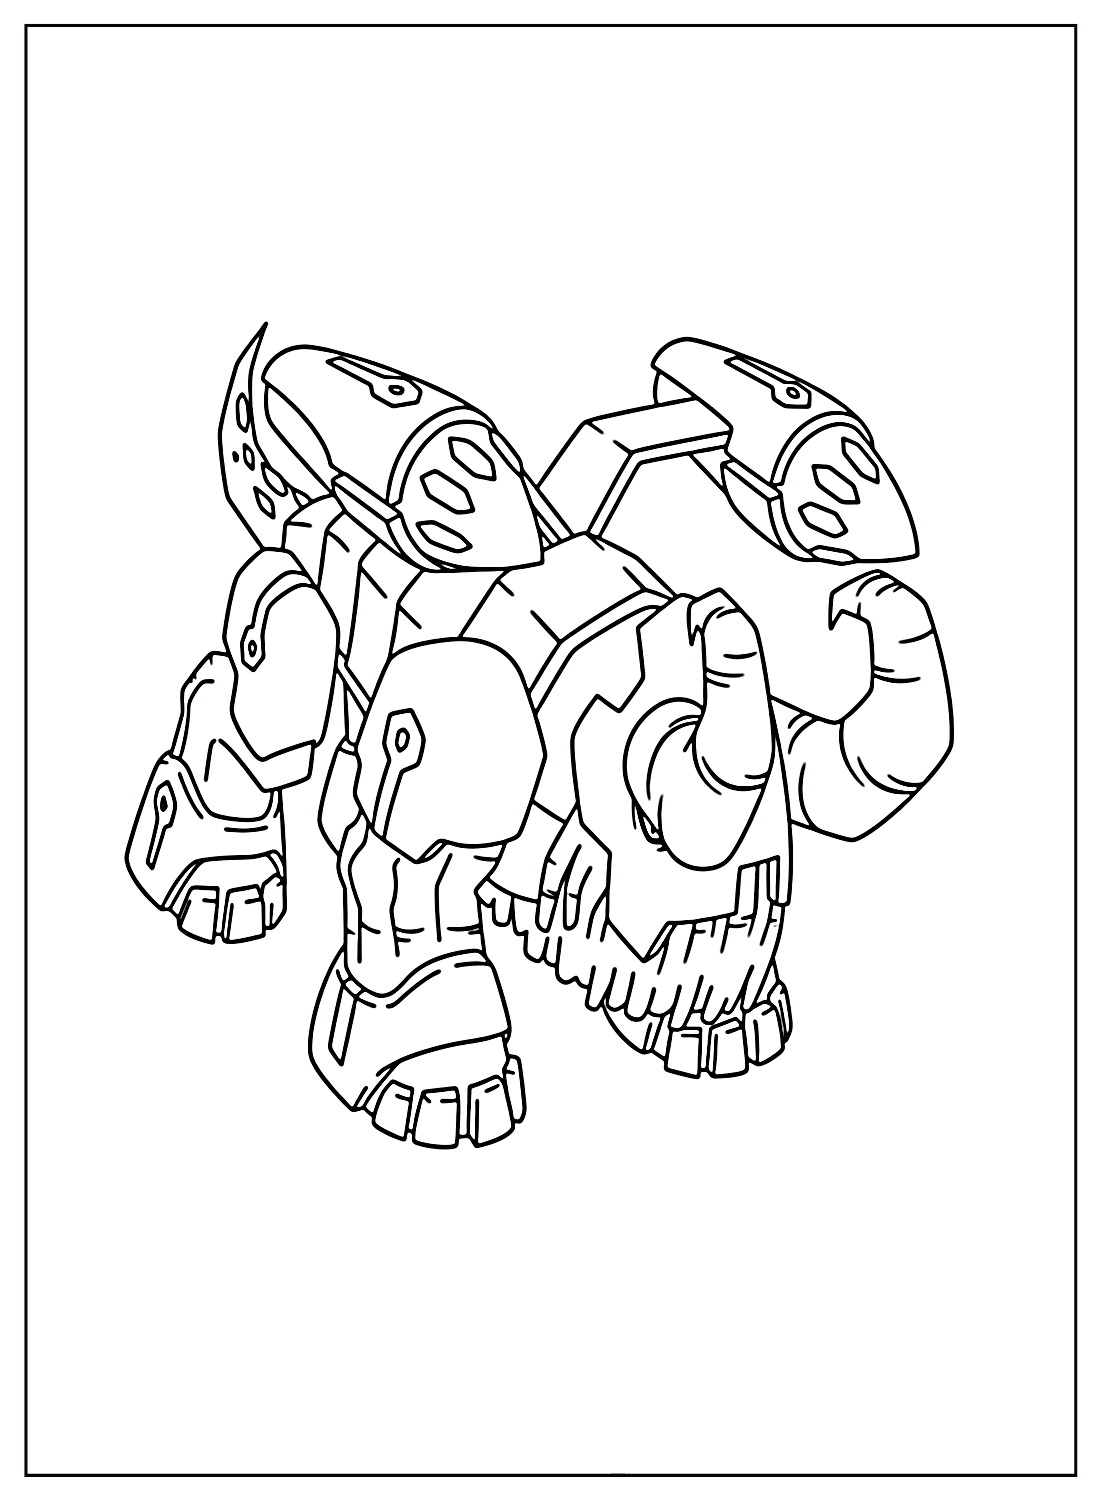 Clash of Clans Coloring Pages Free from Clash of Clans